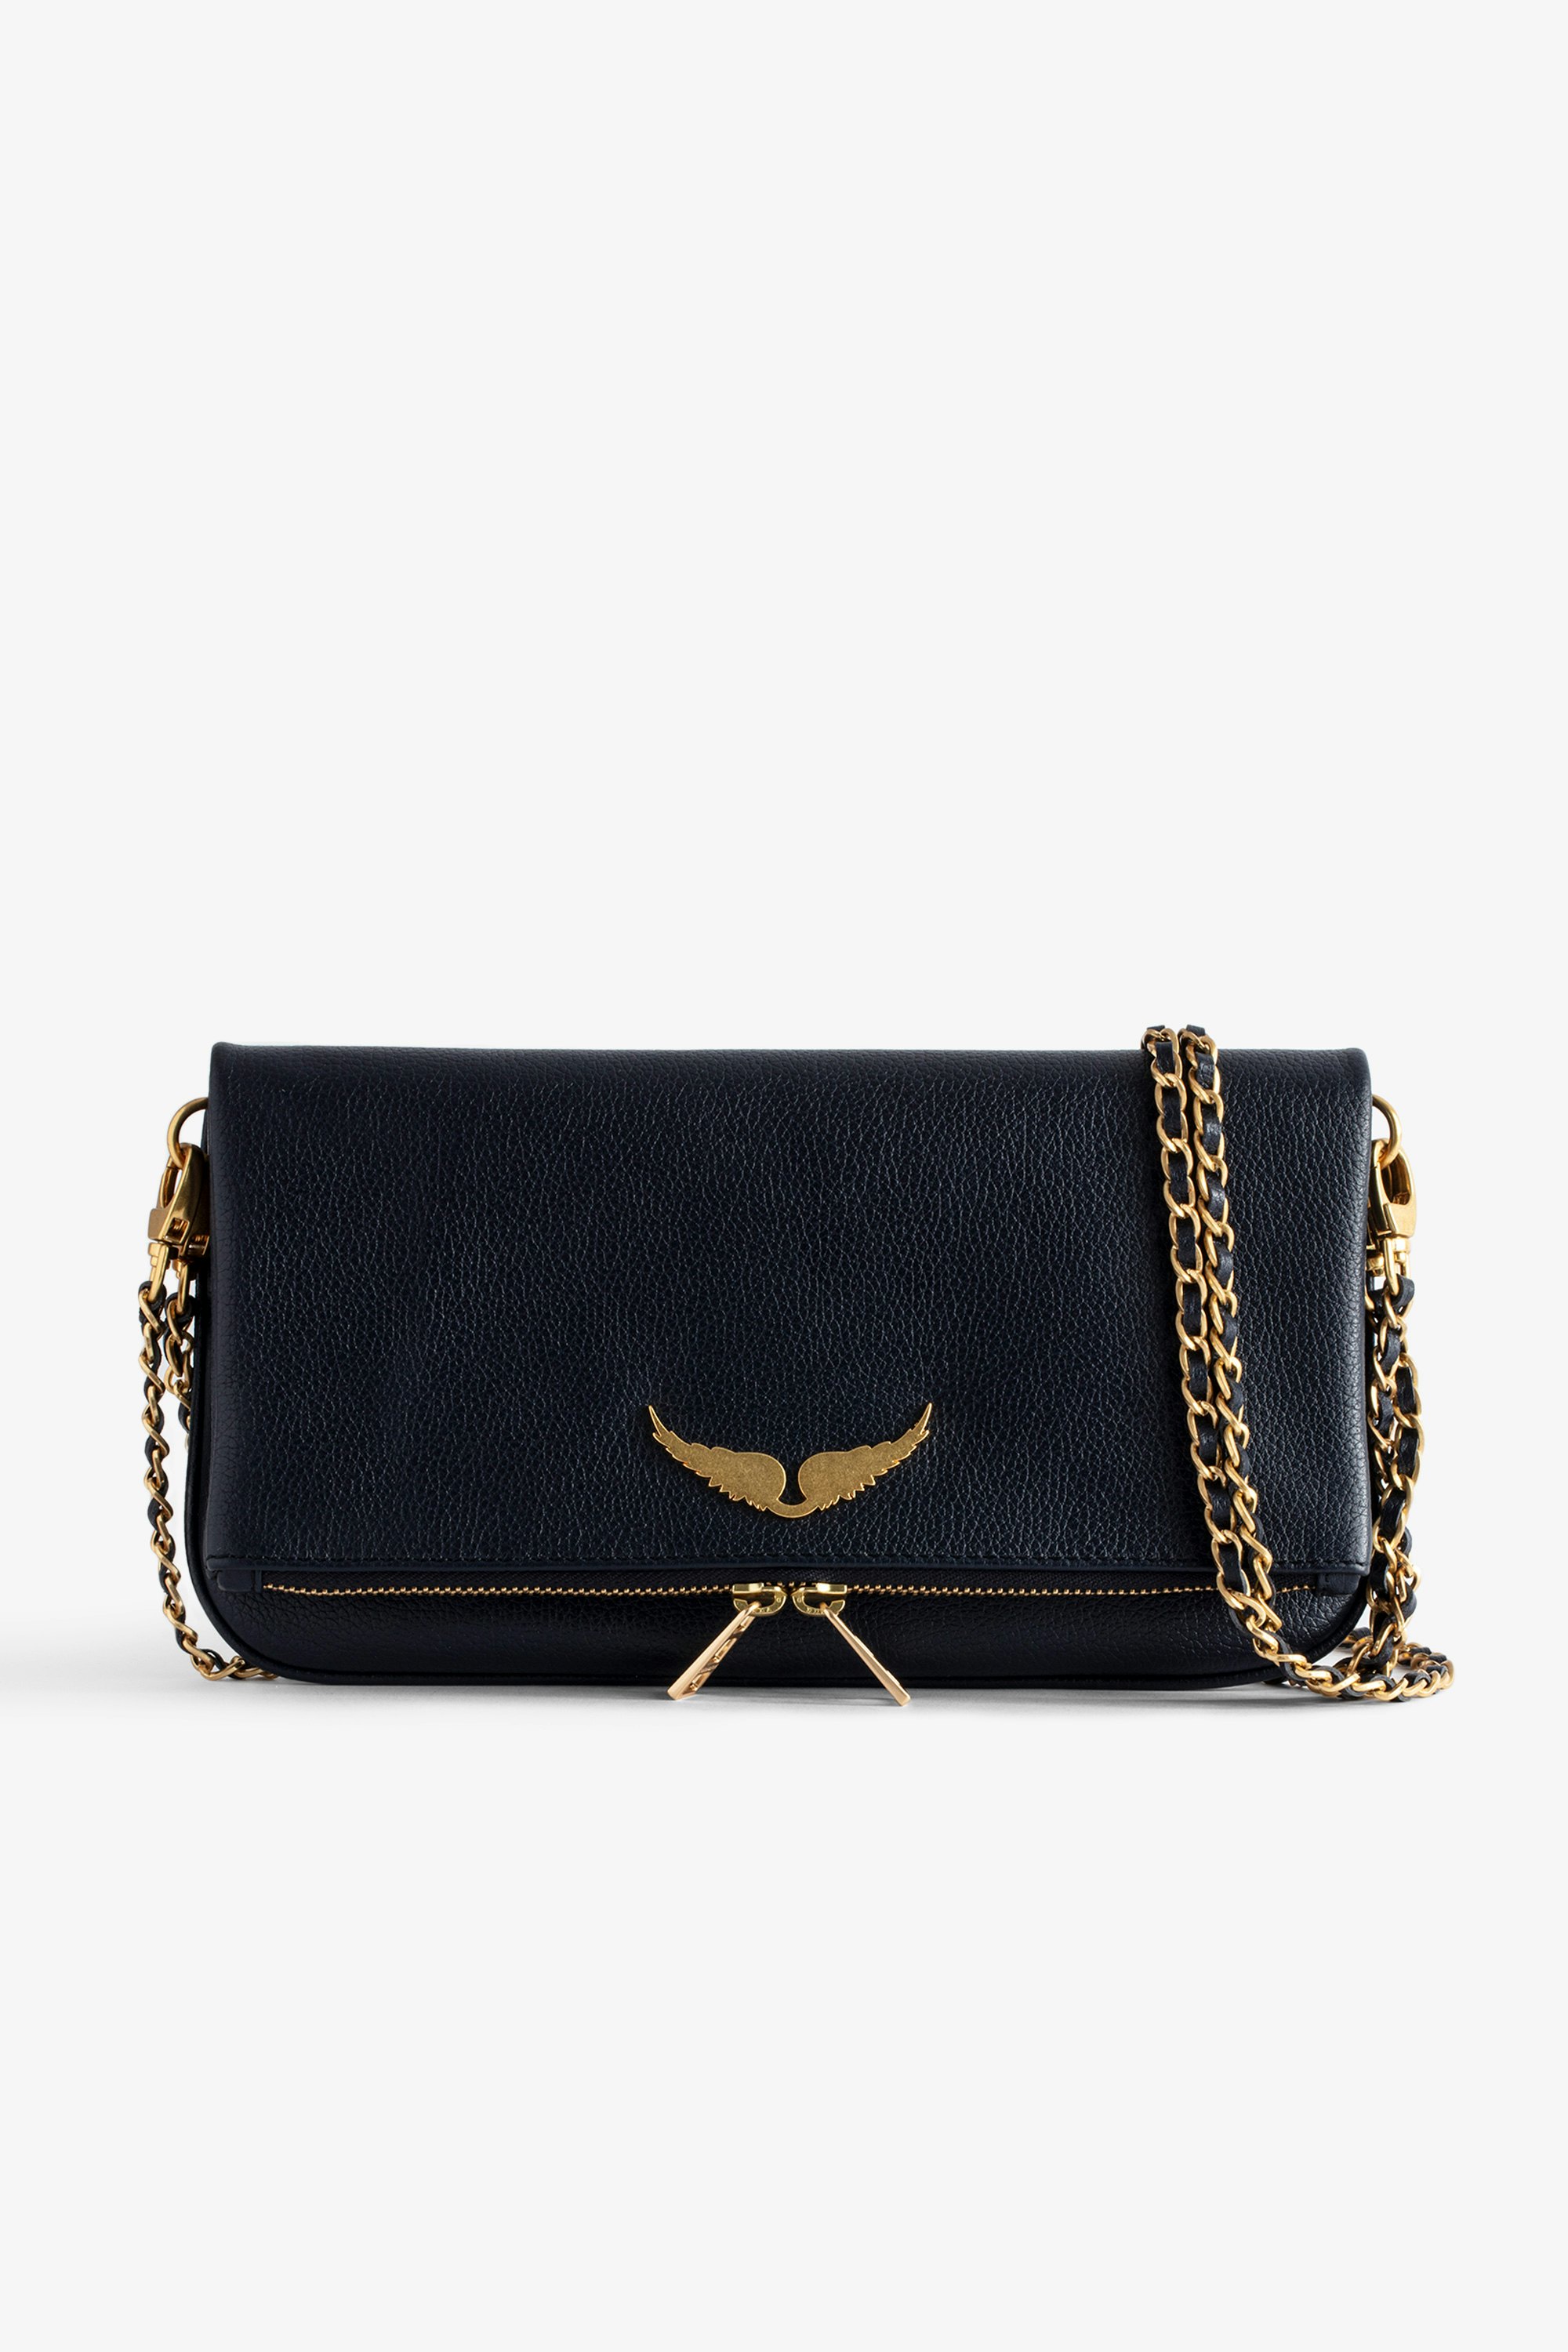 Pochette Rock - Women’s navy blue grained leather clutch with double leather and metal chain strap.